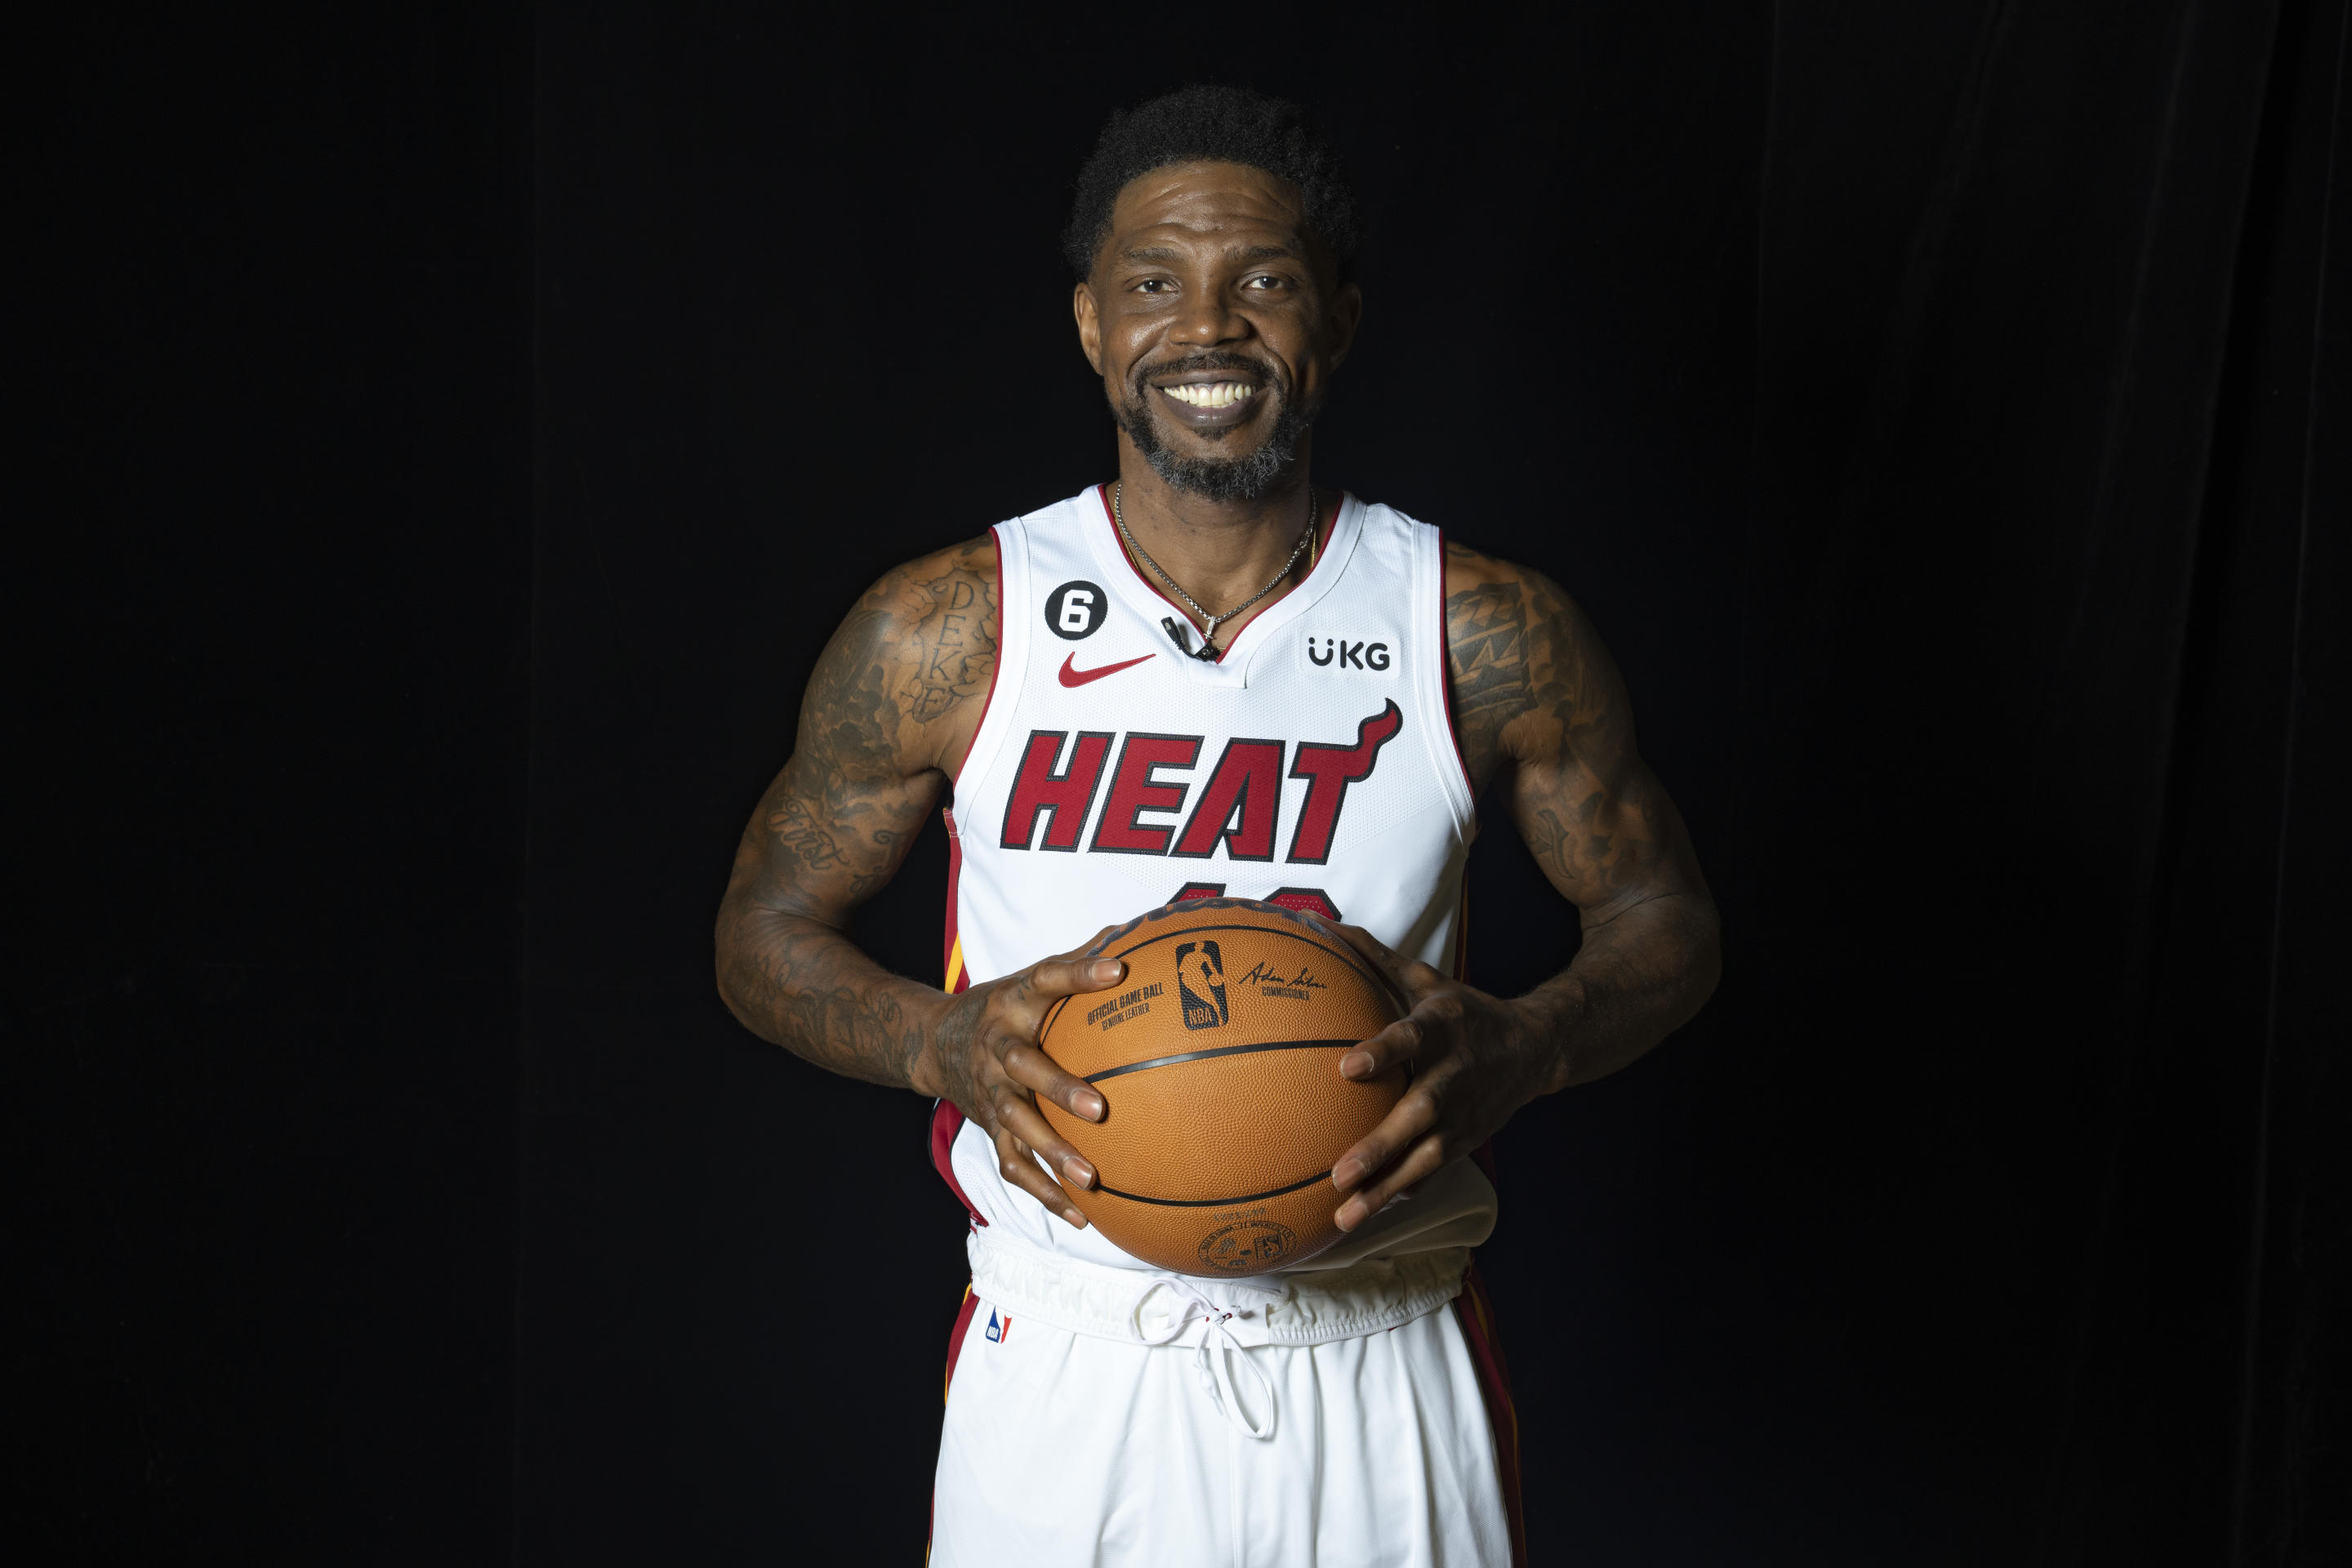 Miami Heat center Udonis Haslem has spent two decades in the league and could win a fourth title in his final season before retirement. (Eric Espada/Getty Images)